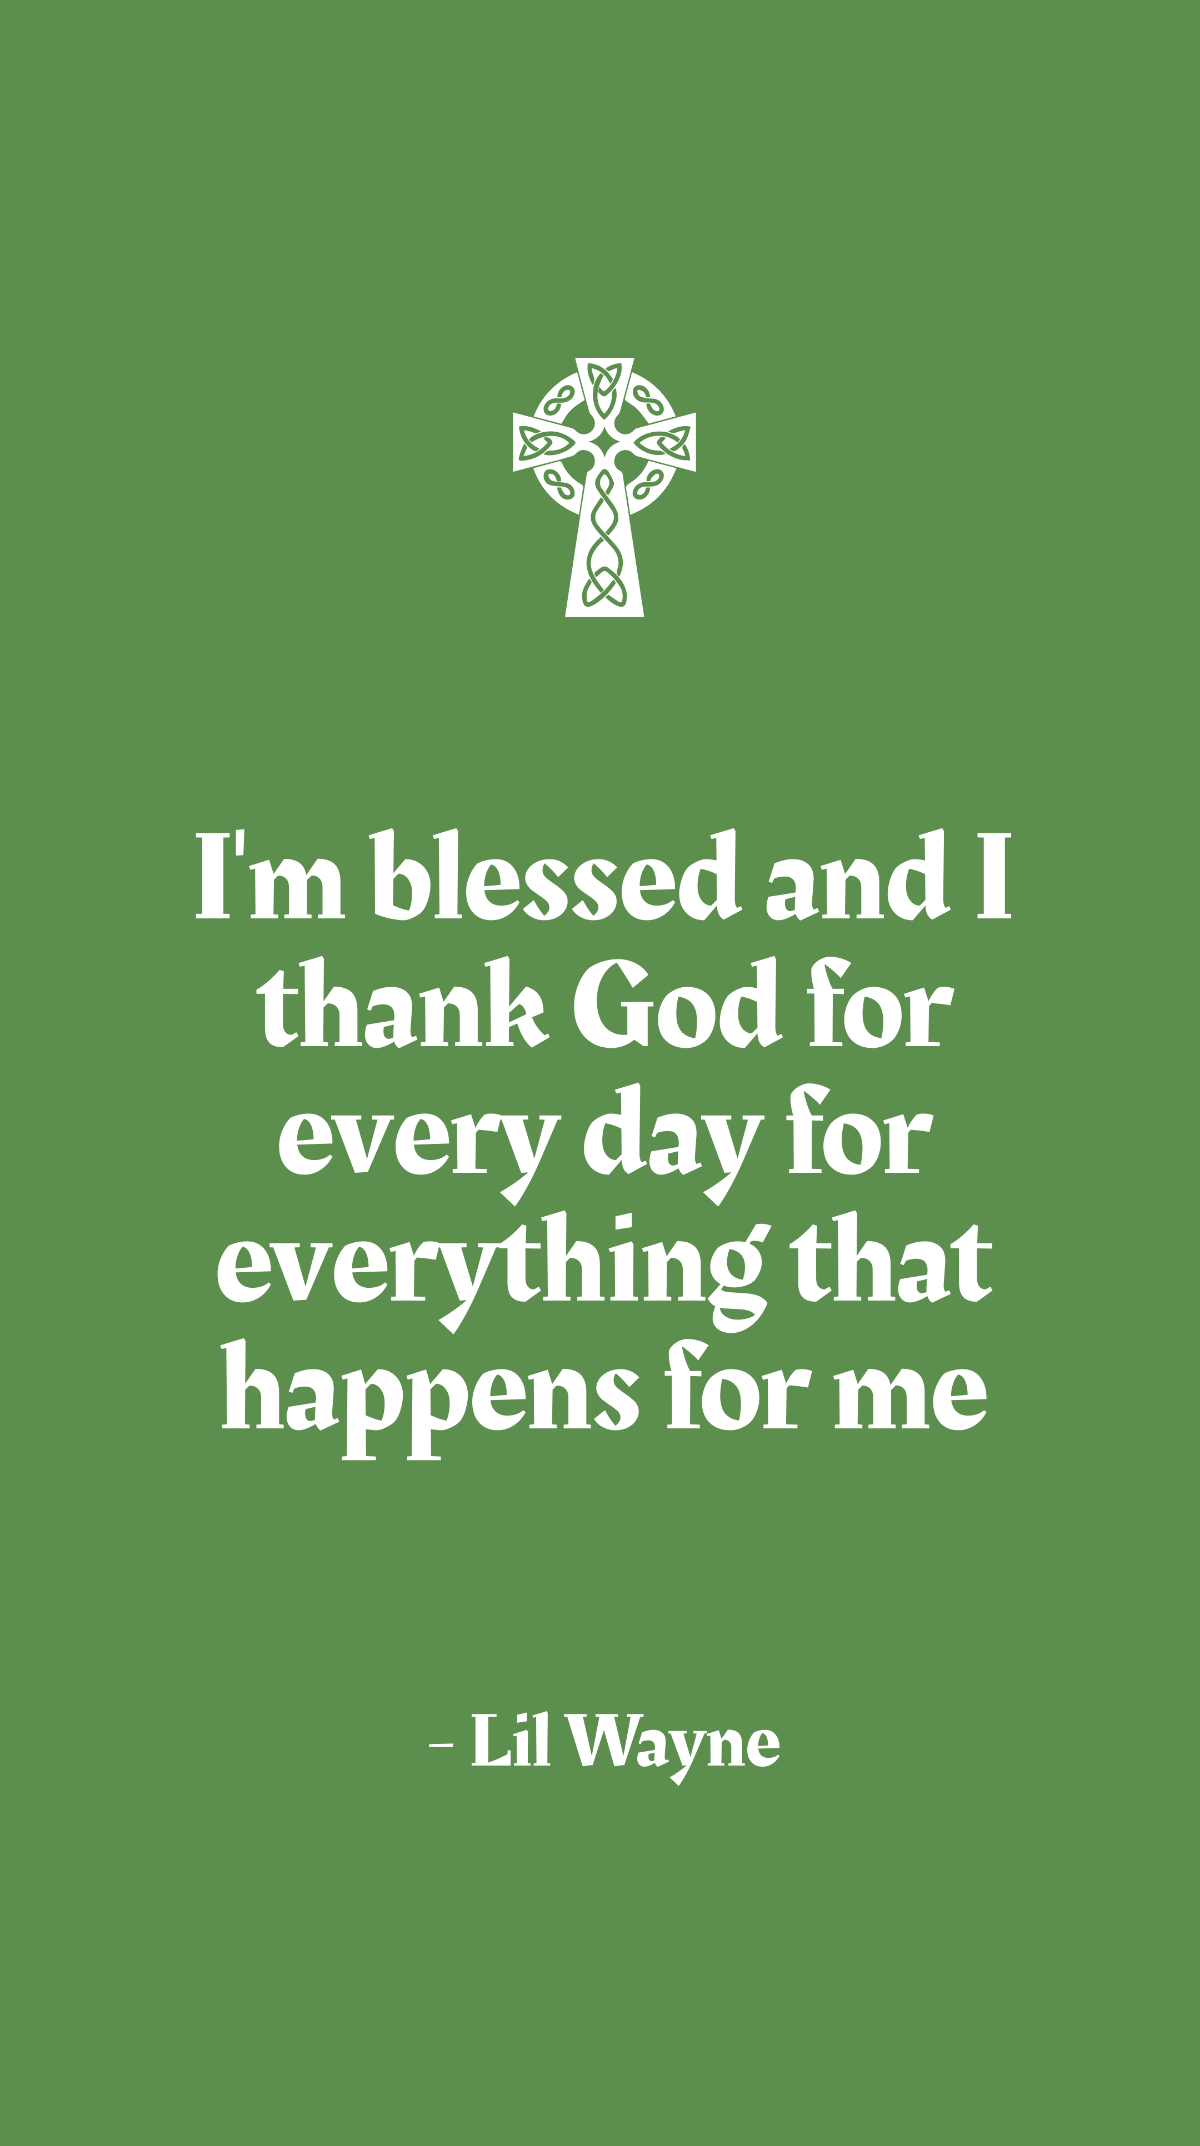 Free Lil Wayne - I'm blessed and I thank God for every day for everything that happens for me Template